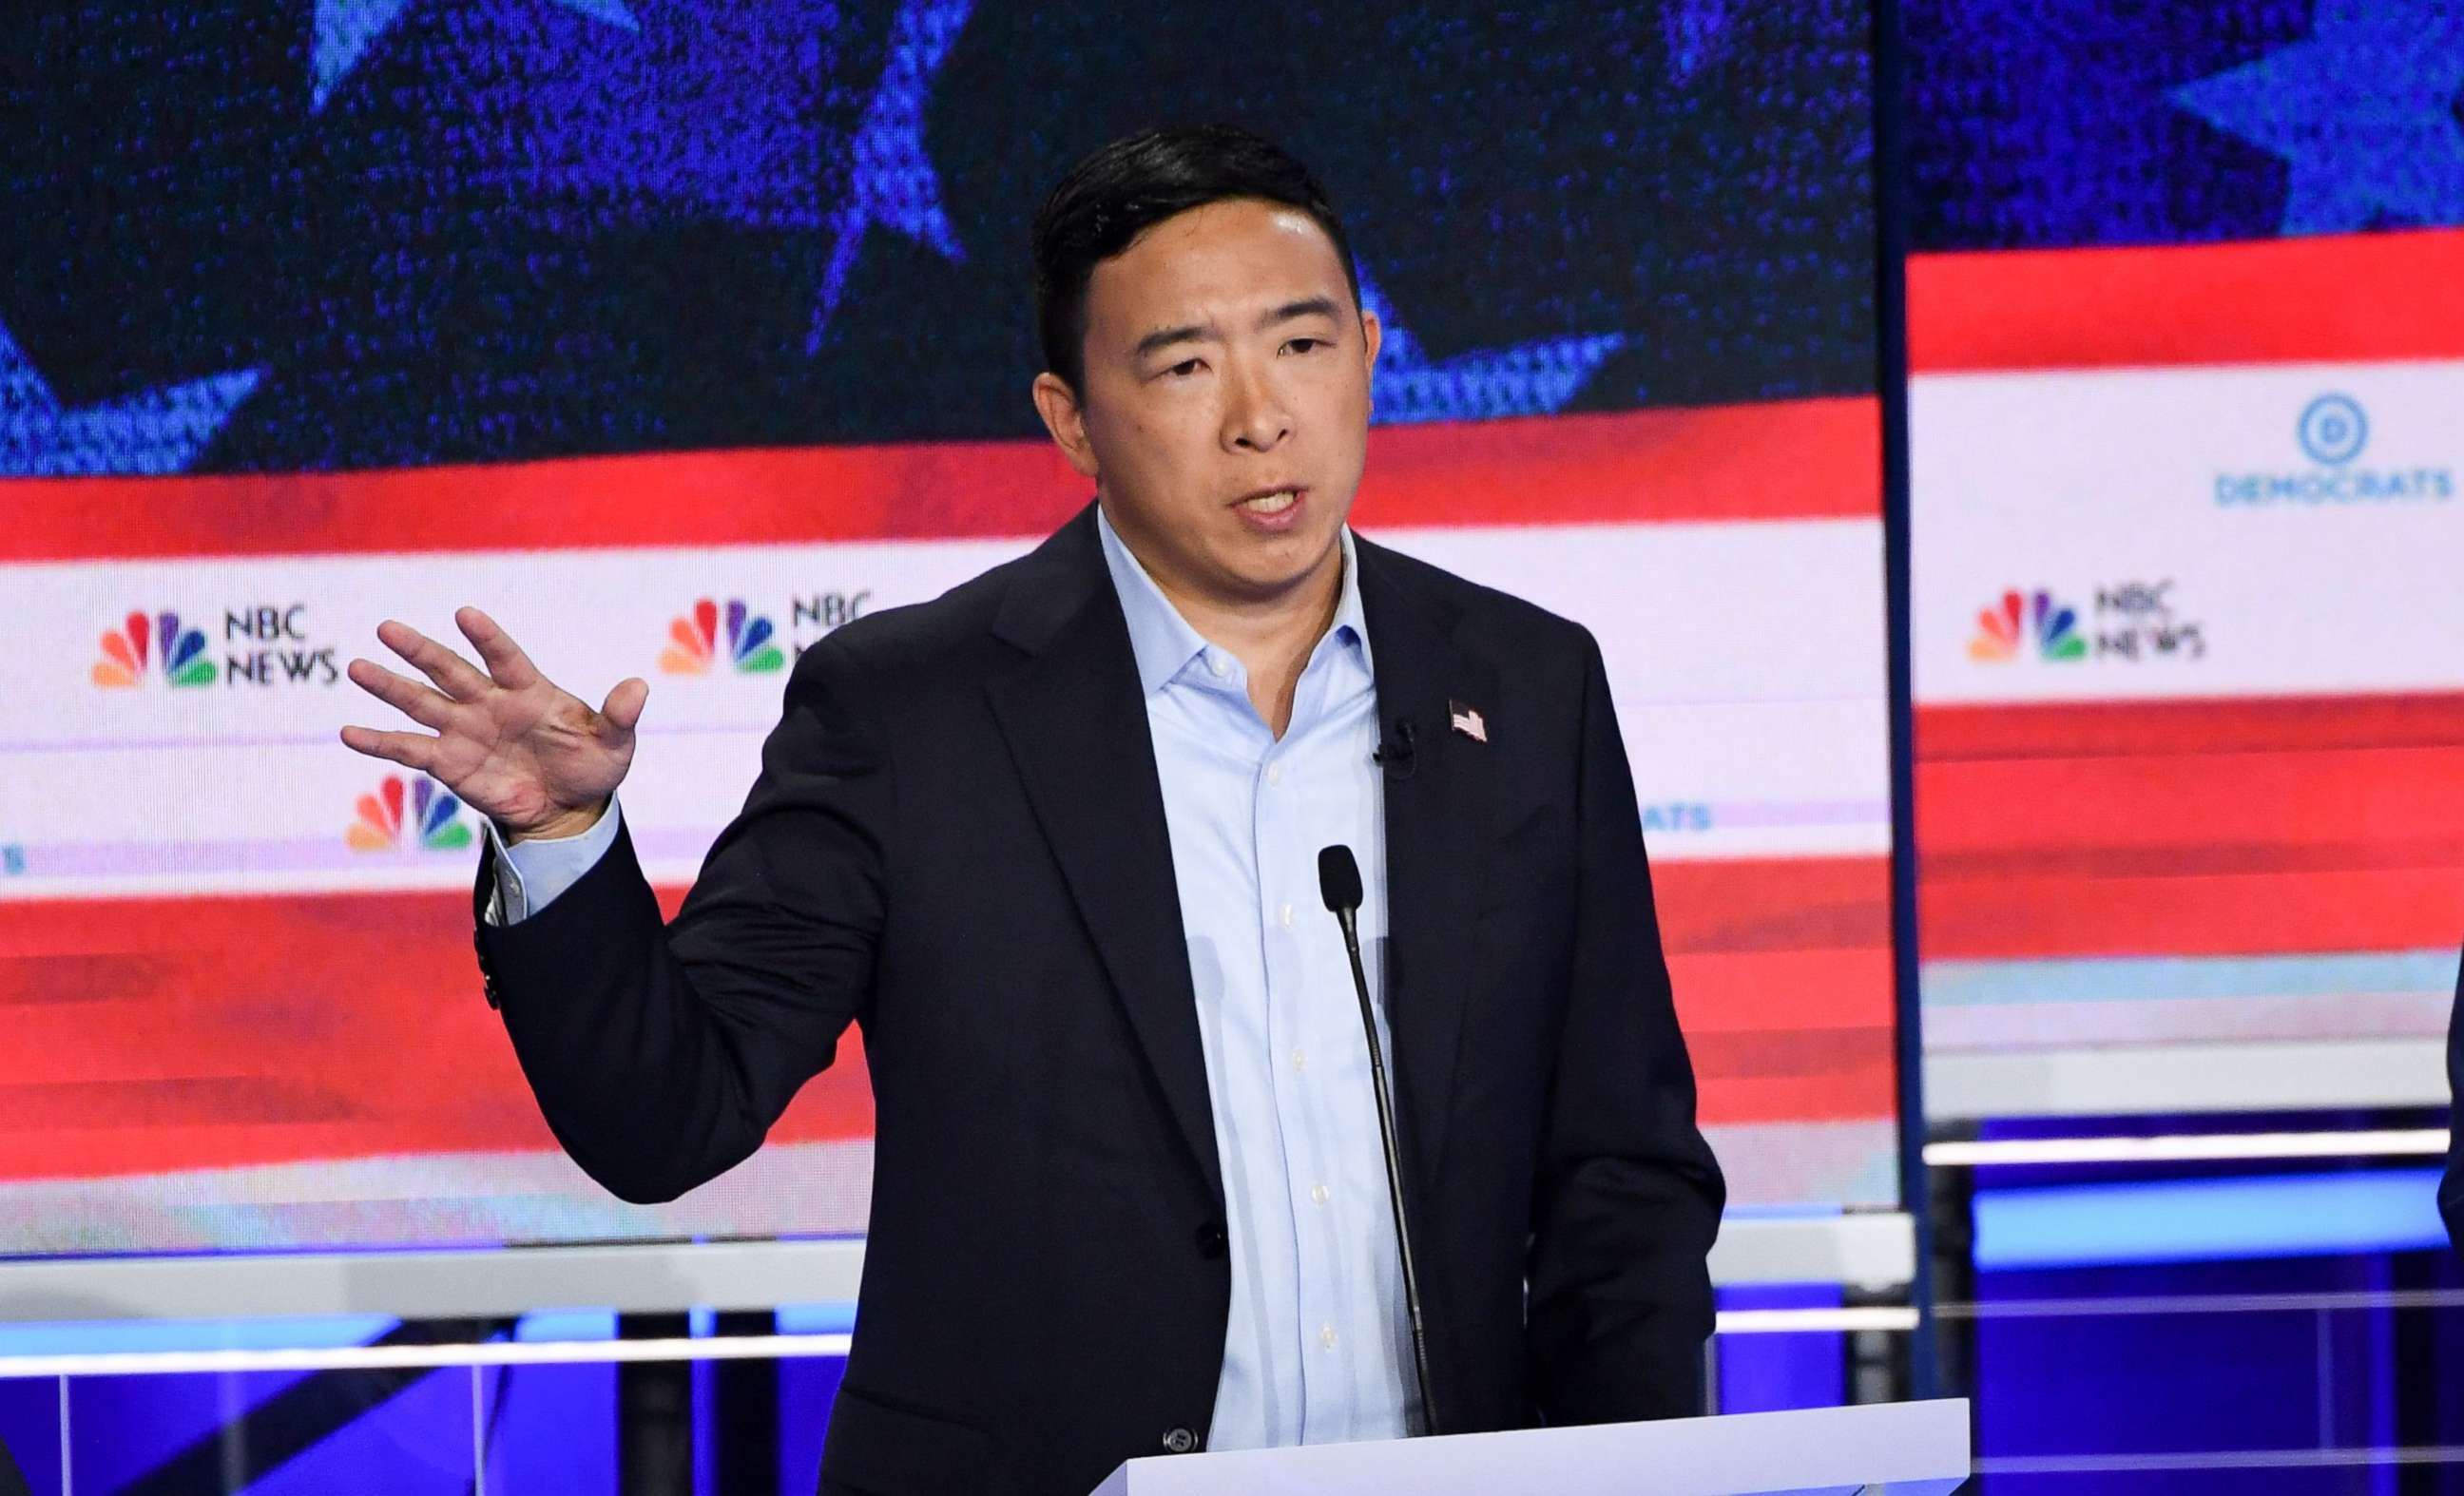 PHOTO: Andrew Yang participates in the second night of the first 2020 democratic presidential debate at the Adrienne Arsht Center for the Performing Arts in Miami, June 27, 2019.